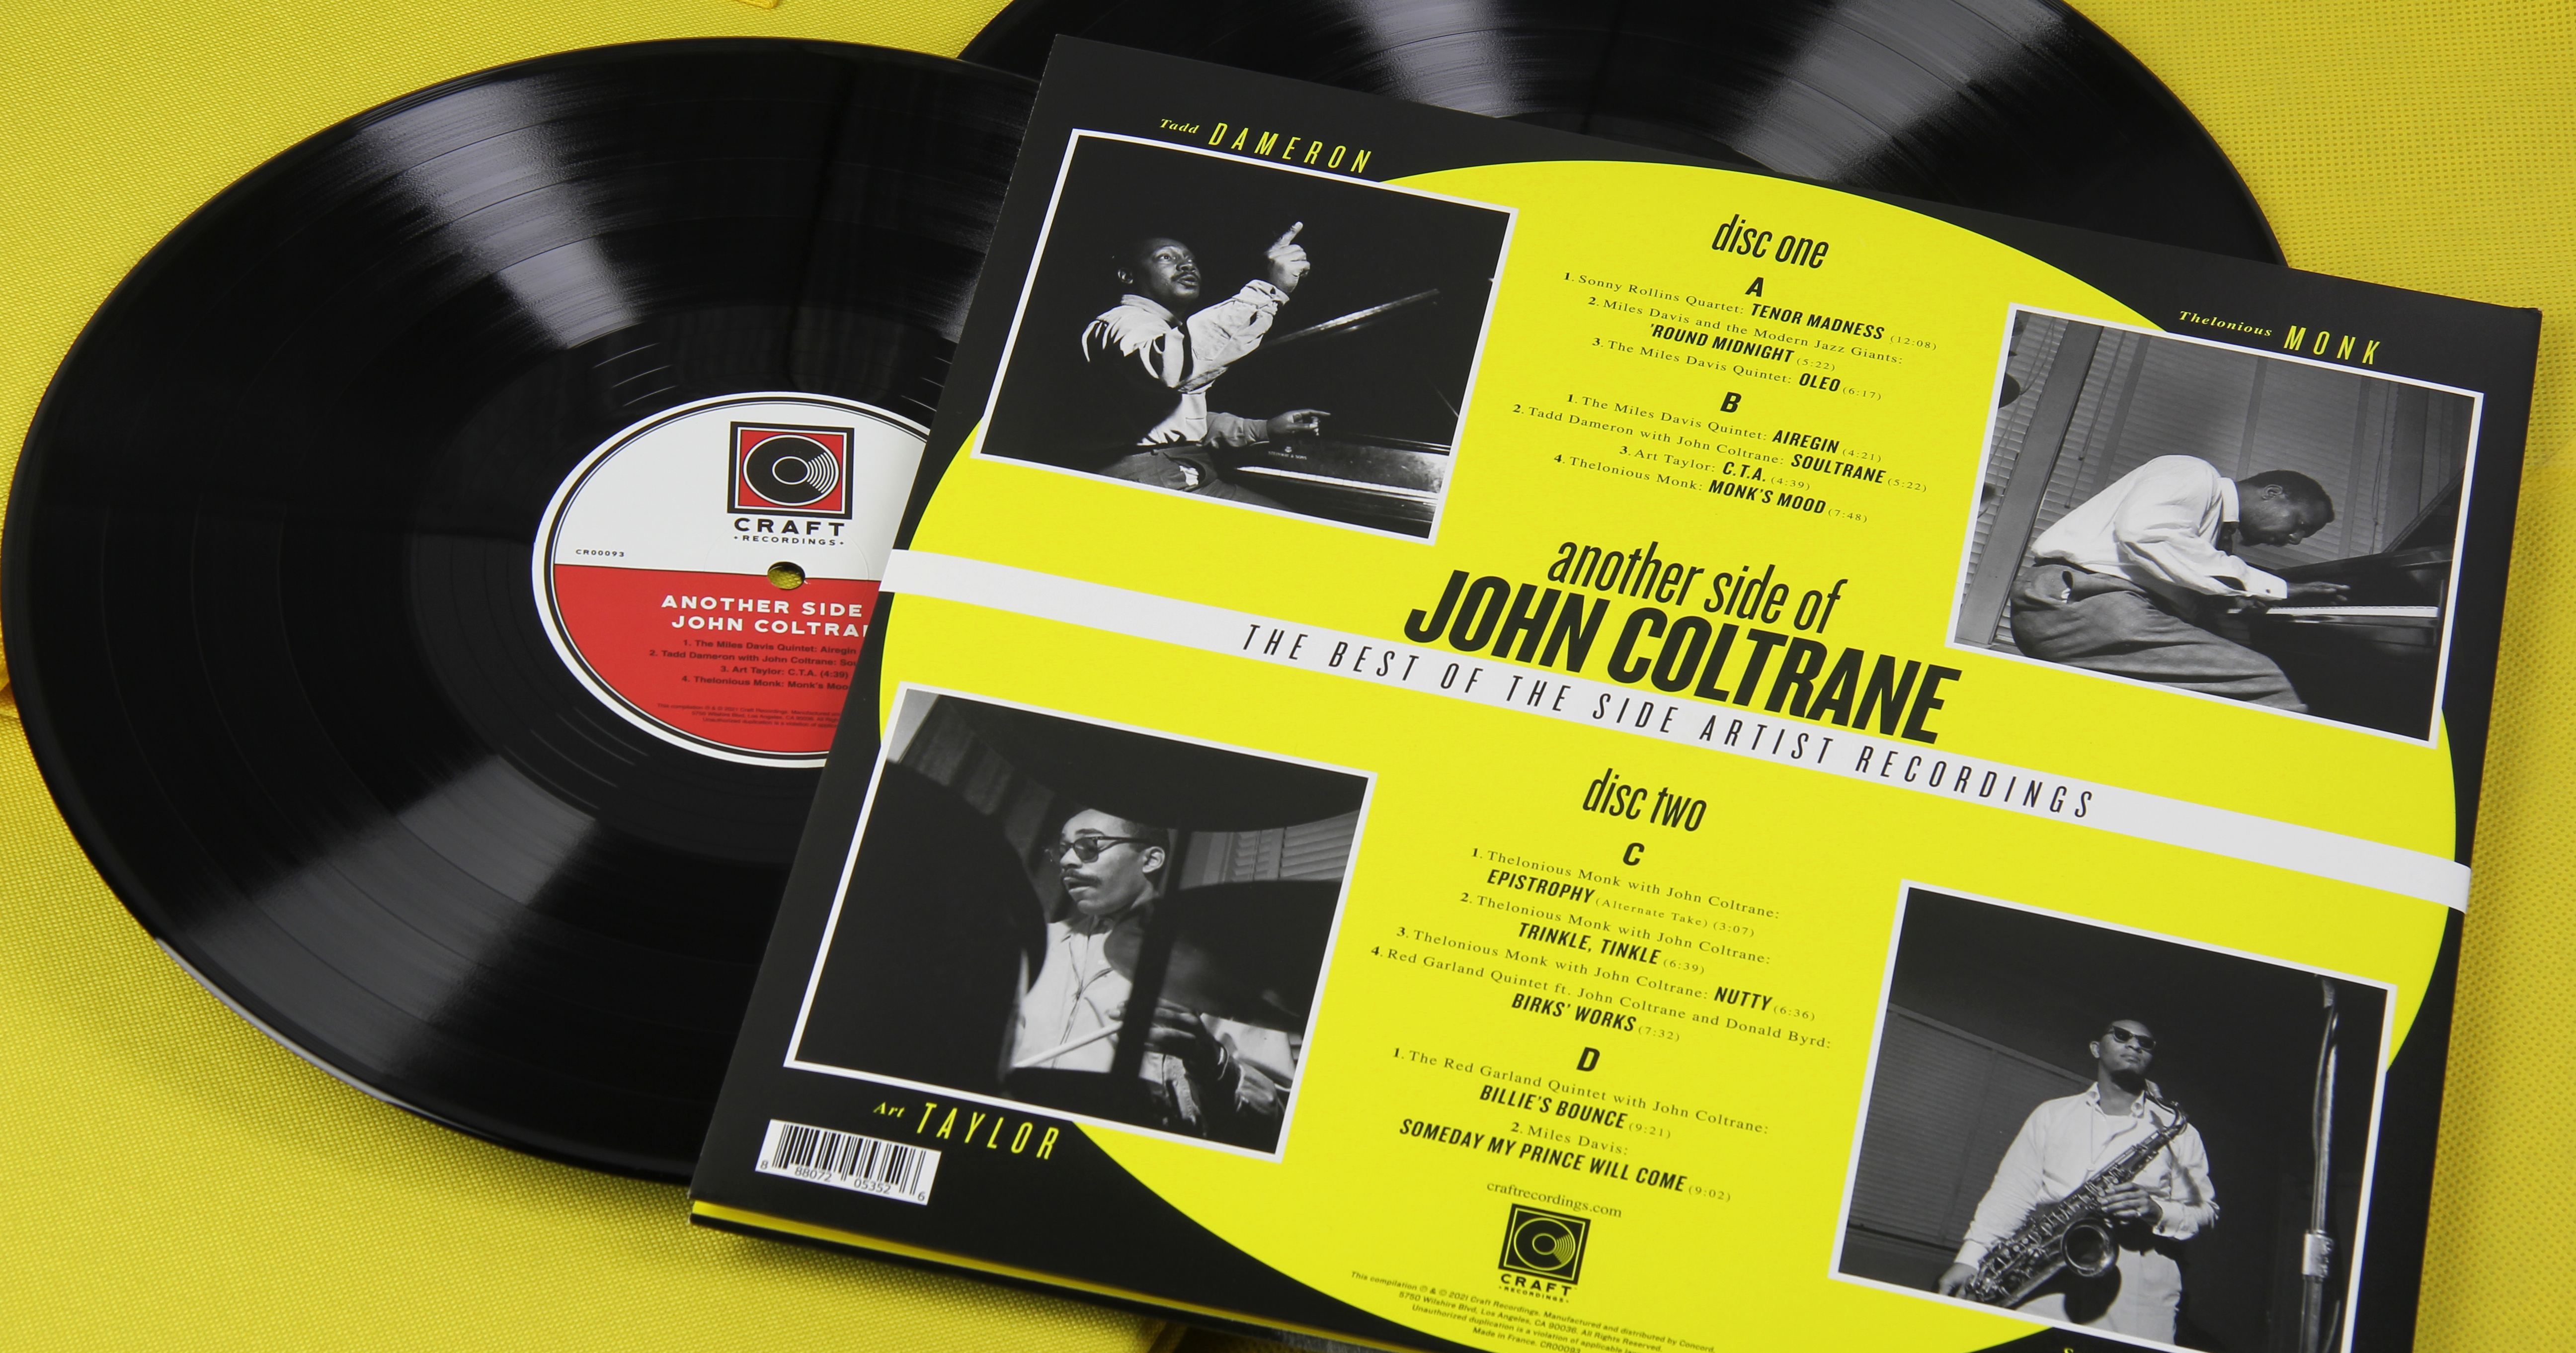 Another side of John Coltrane